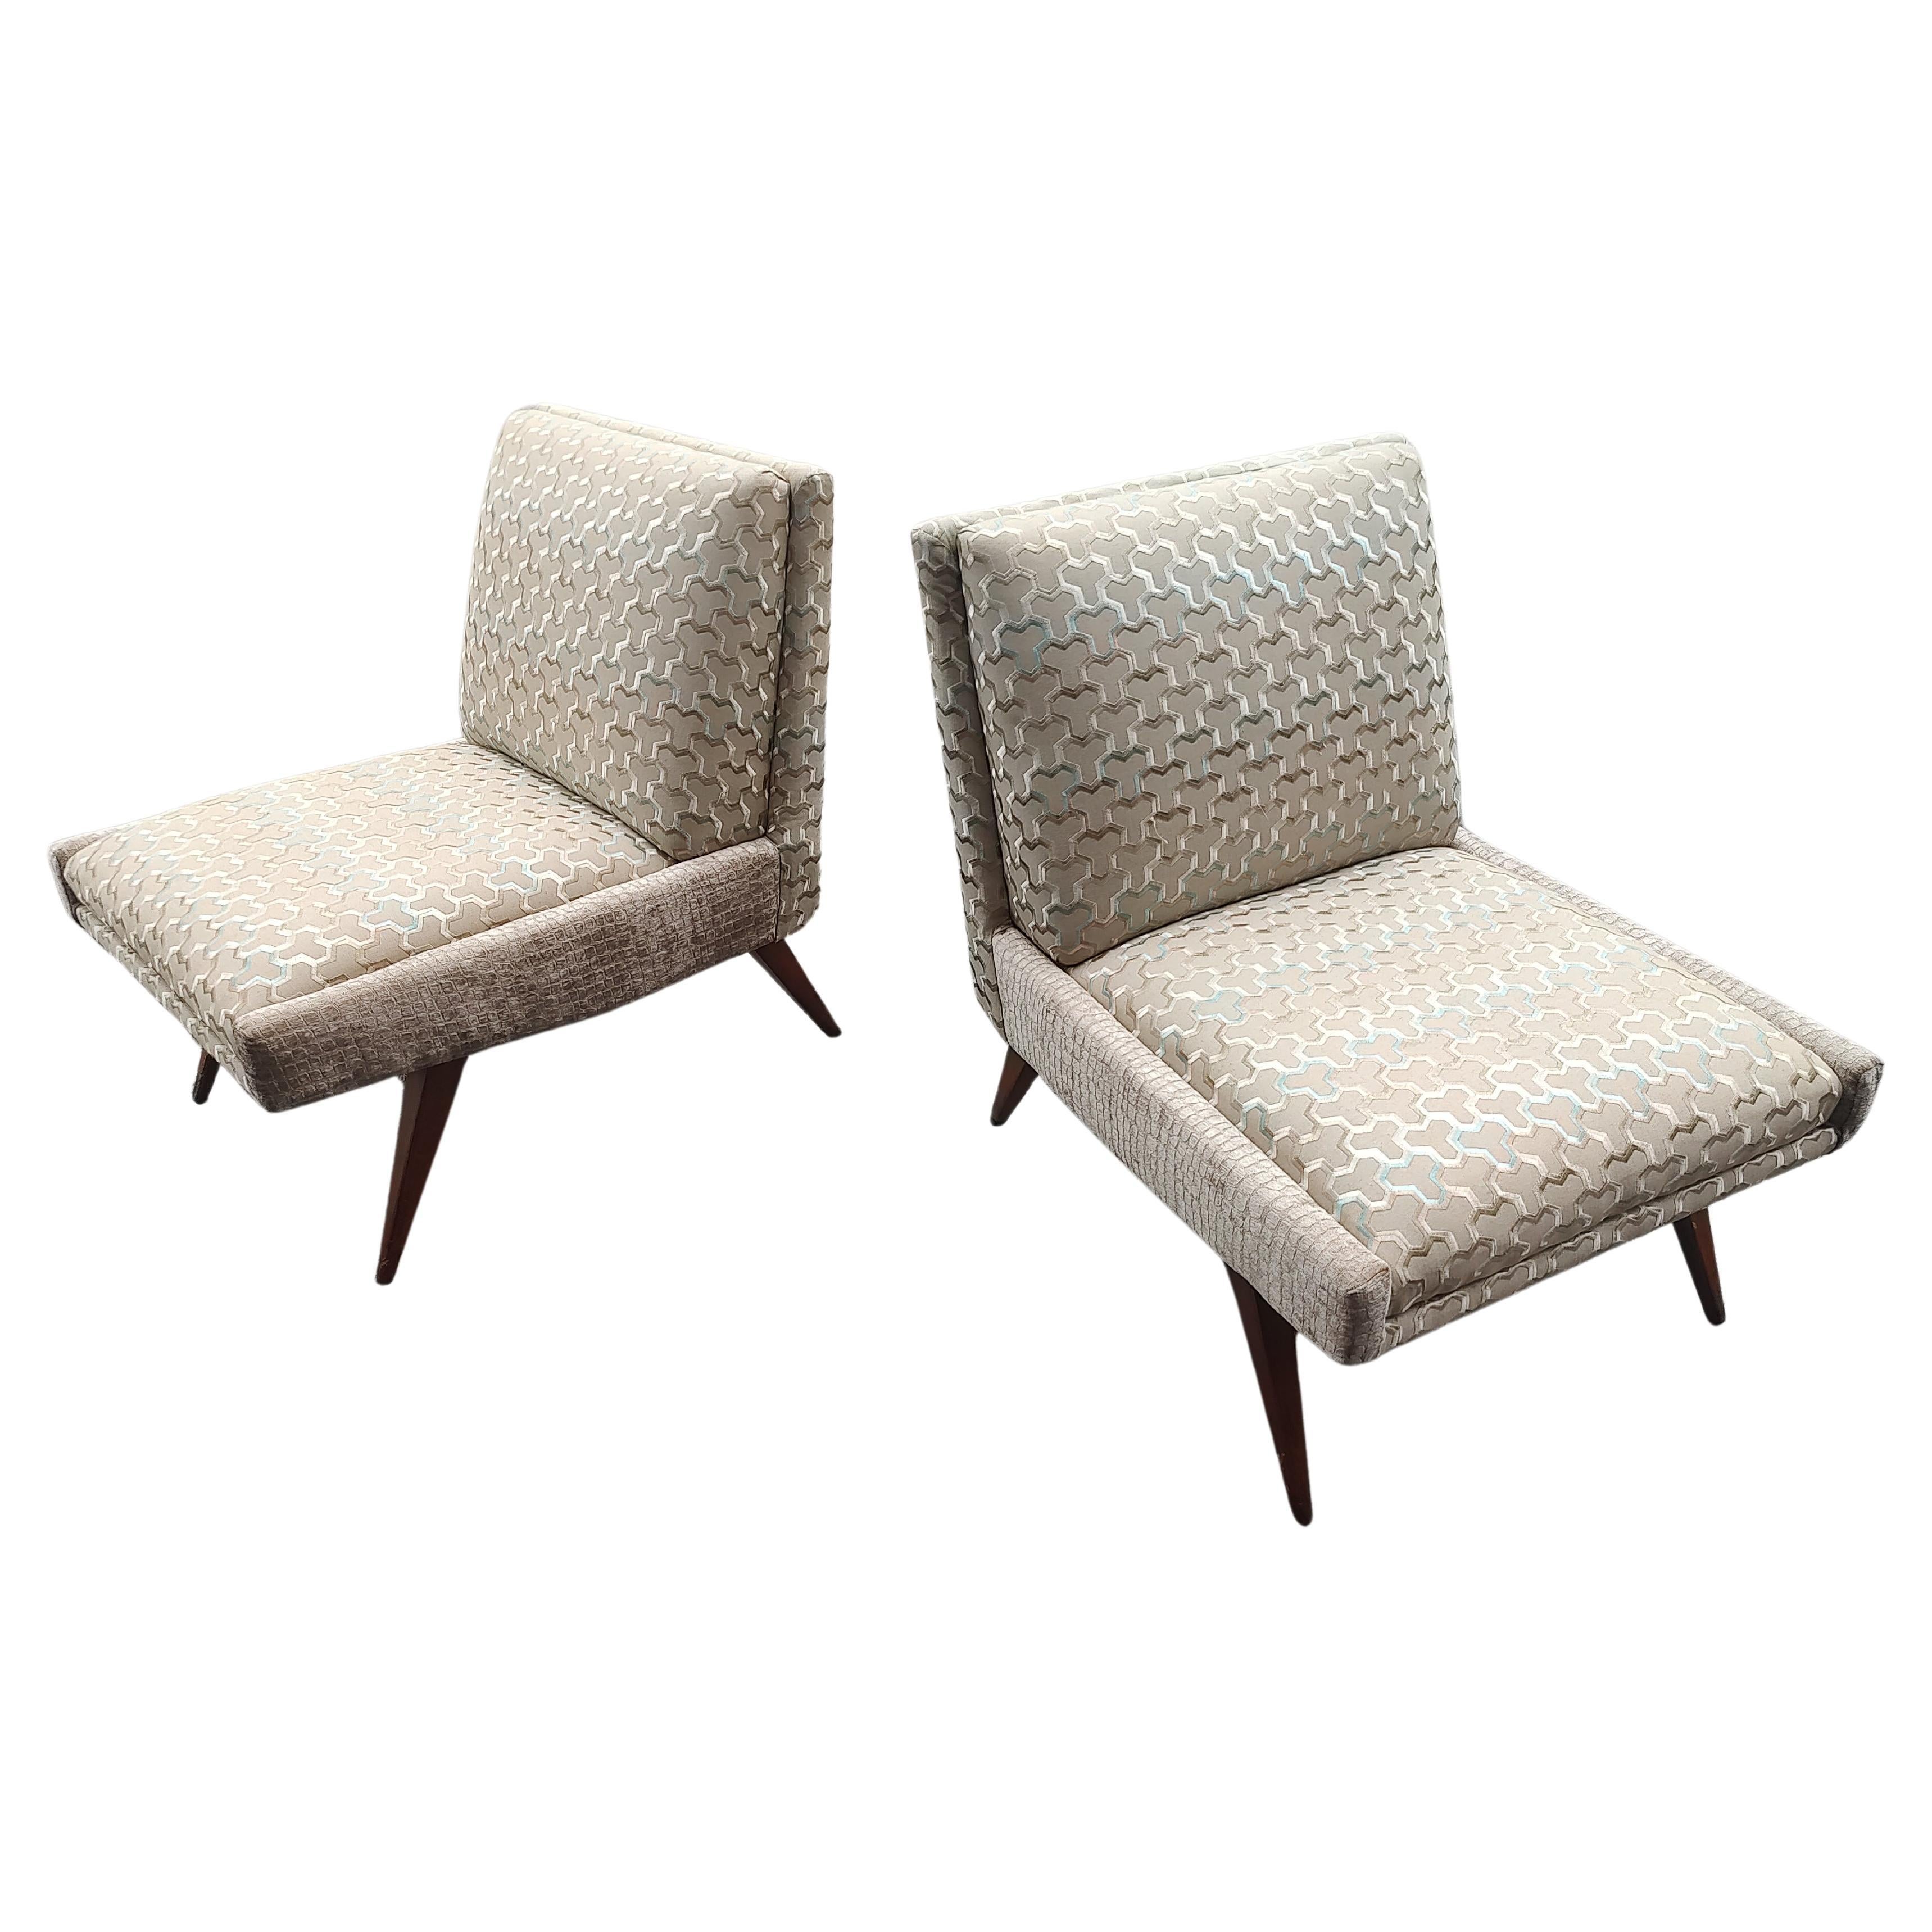 American Pair of Mid Century Modern Slipper Chairs by Paul McCobb Planner Group Restored For Sale